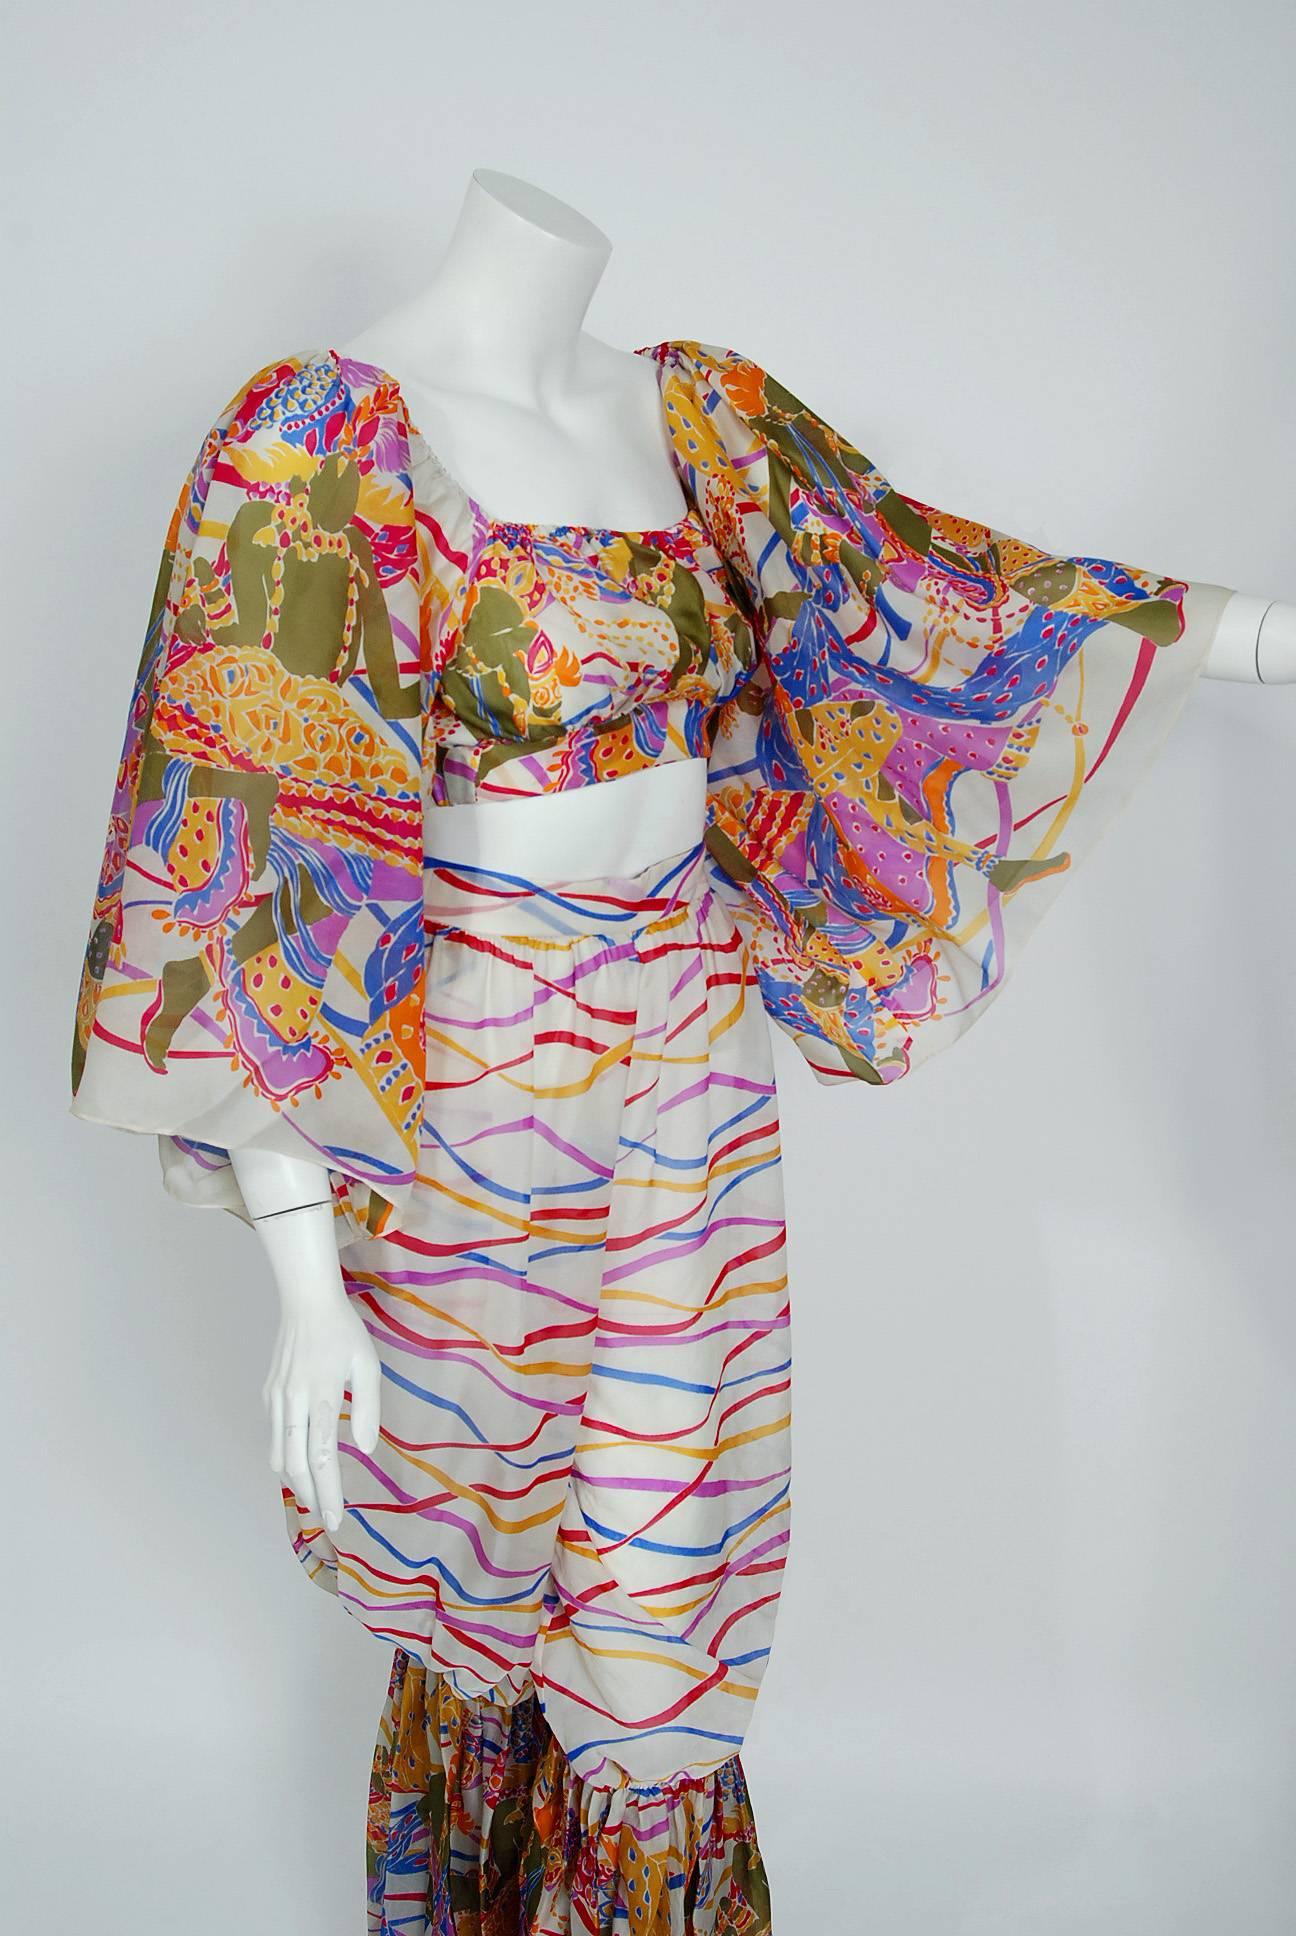 Breathtaking Yves Saint Laurent bohemian gypsy two-piece silk organza ensemble with original designer tags from his infamous 1991 Rive Gauche Leon Bakst novelty print collection. Pieces from this runway season are very rare and are true examples of